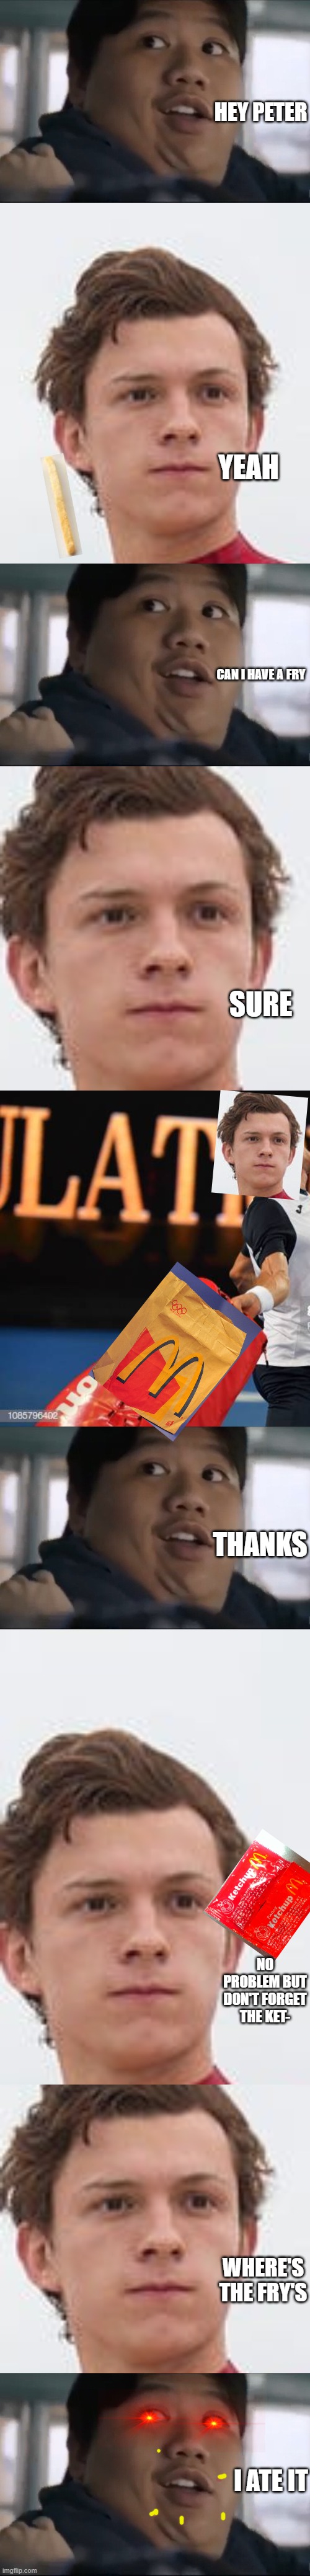 what happens when your friends ask for fries |  HEY PETER; YEAH; CAN I HAVE A FRY; SURE; THANKS; NO PROBLEM BUT DON'T FORGET THE KET-; WHERE'S THE FRY'S; I ATE IT | image tagged in memes | made w/ Imgflip meme maker